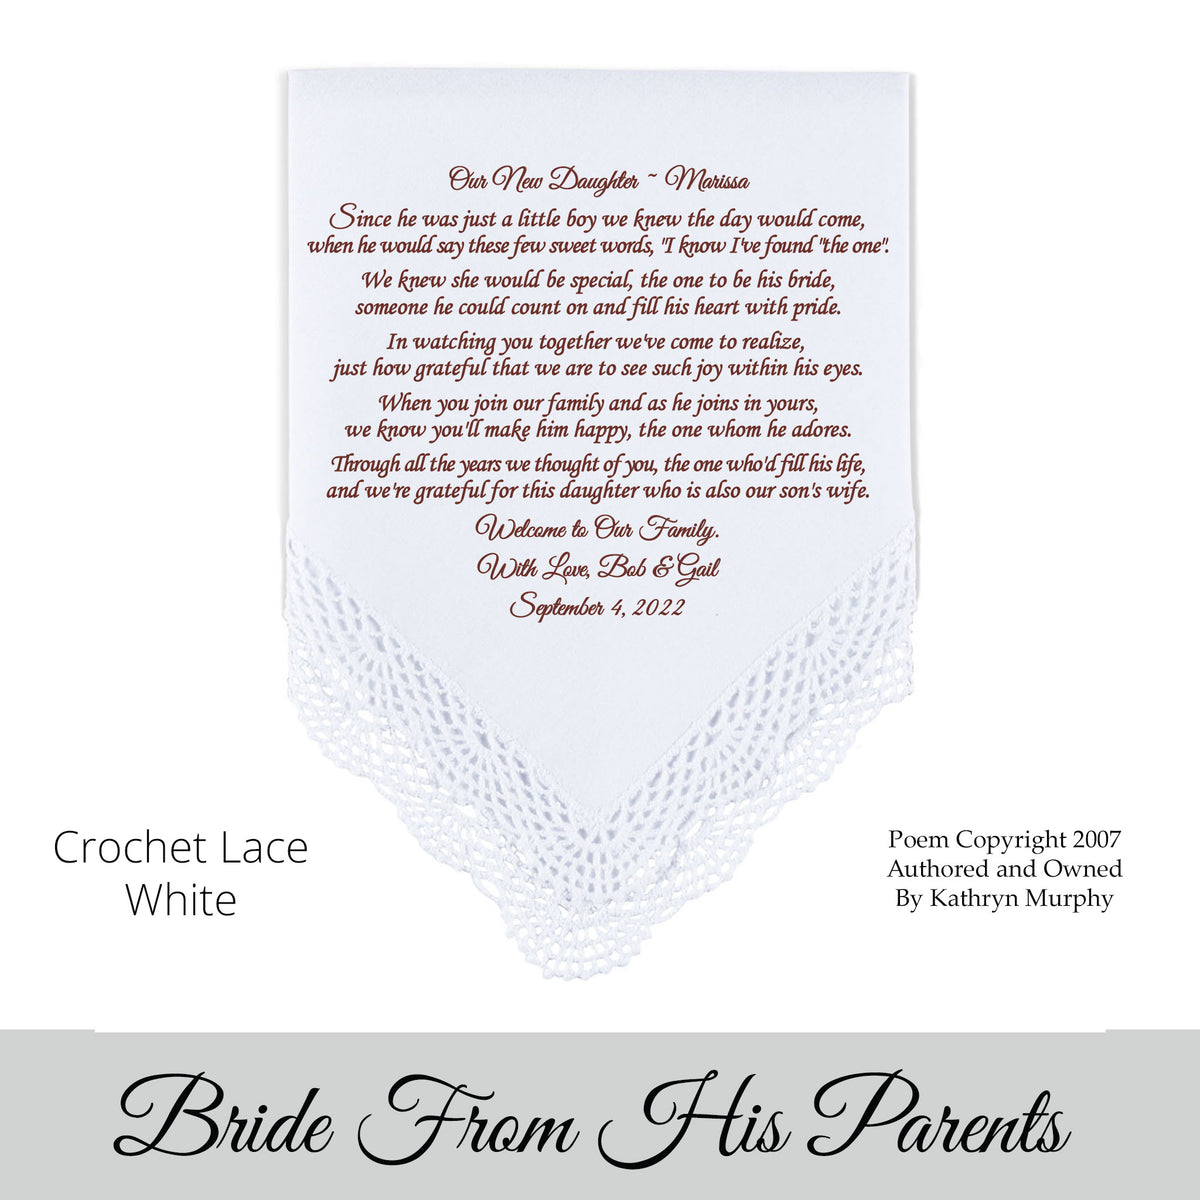 Gift for the Bride wedding hankie with the poem Our New Daughter